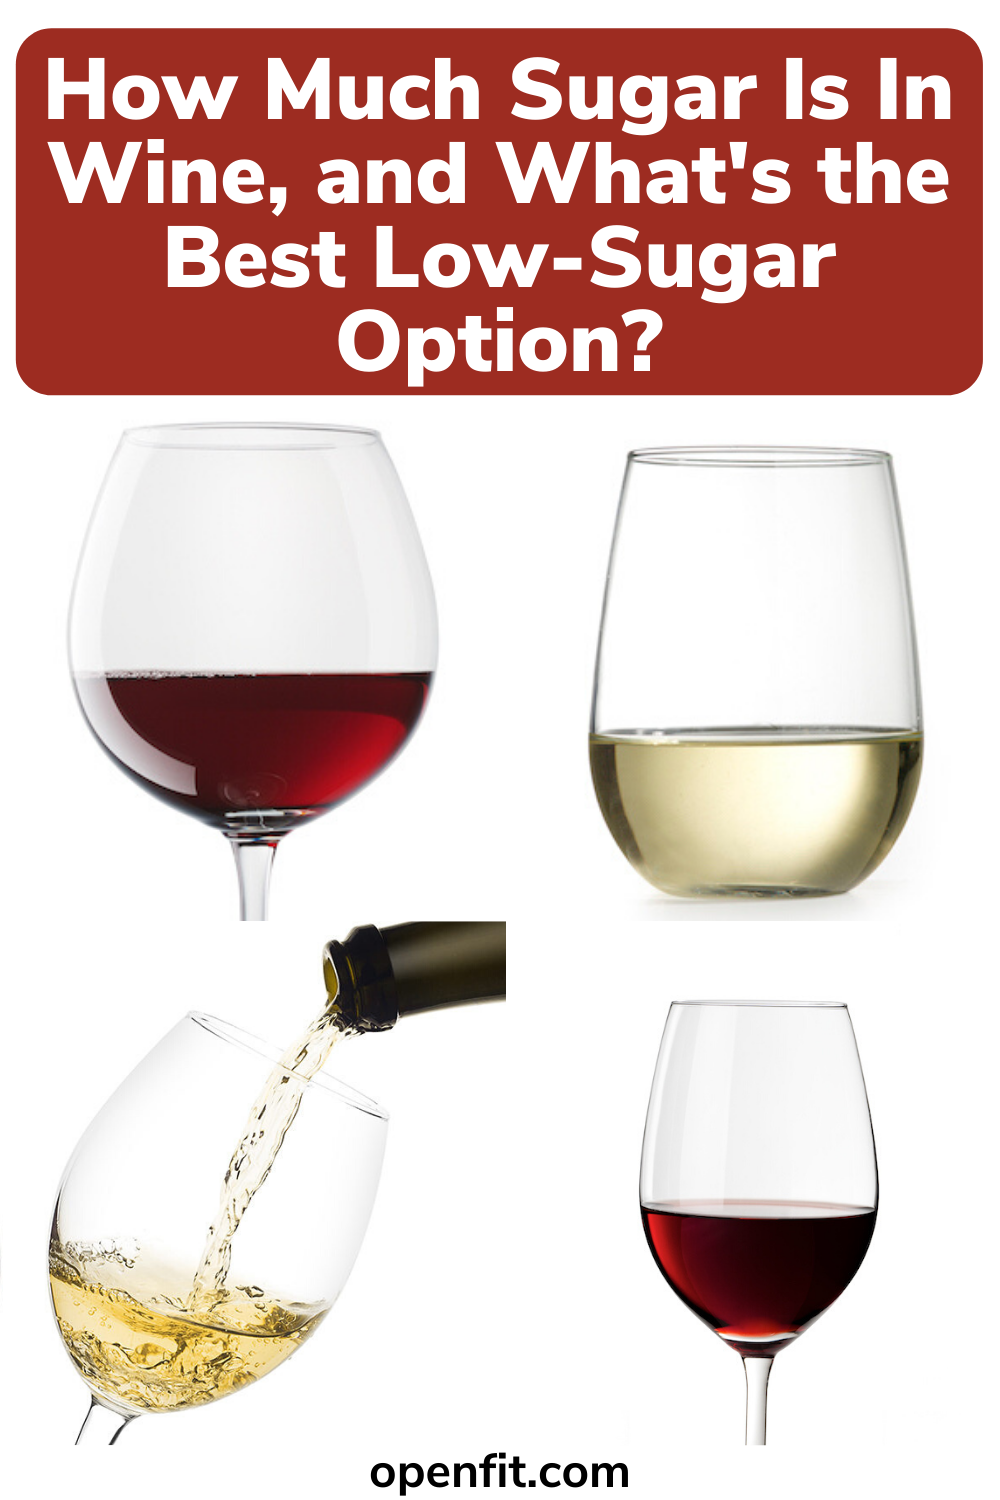 How Much Sugar Is In Wine and Which Has The Least ...